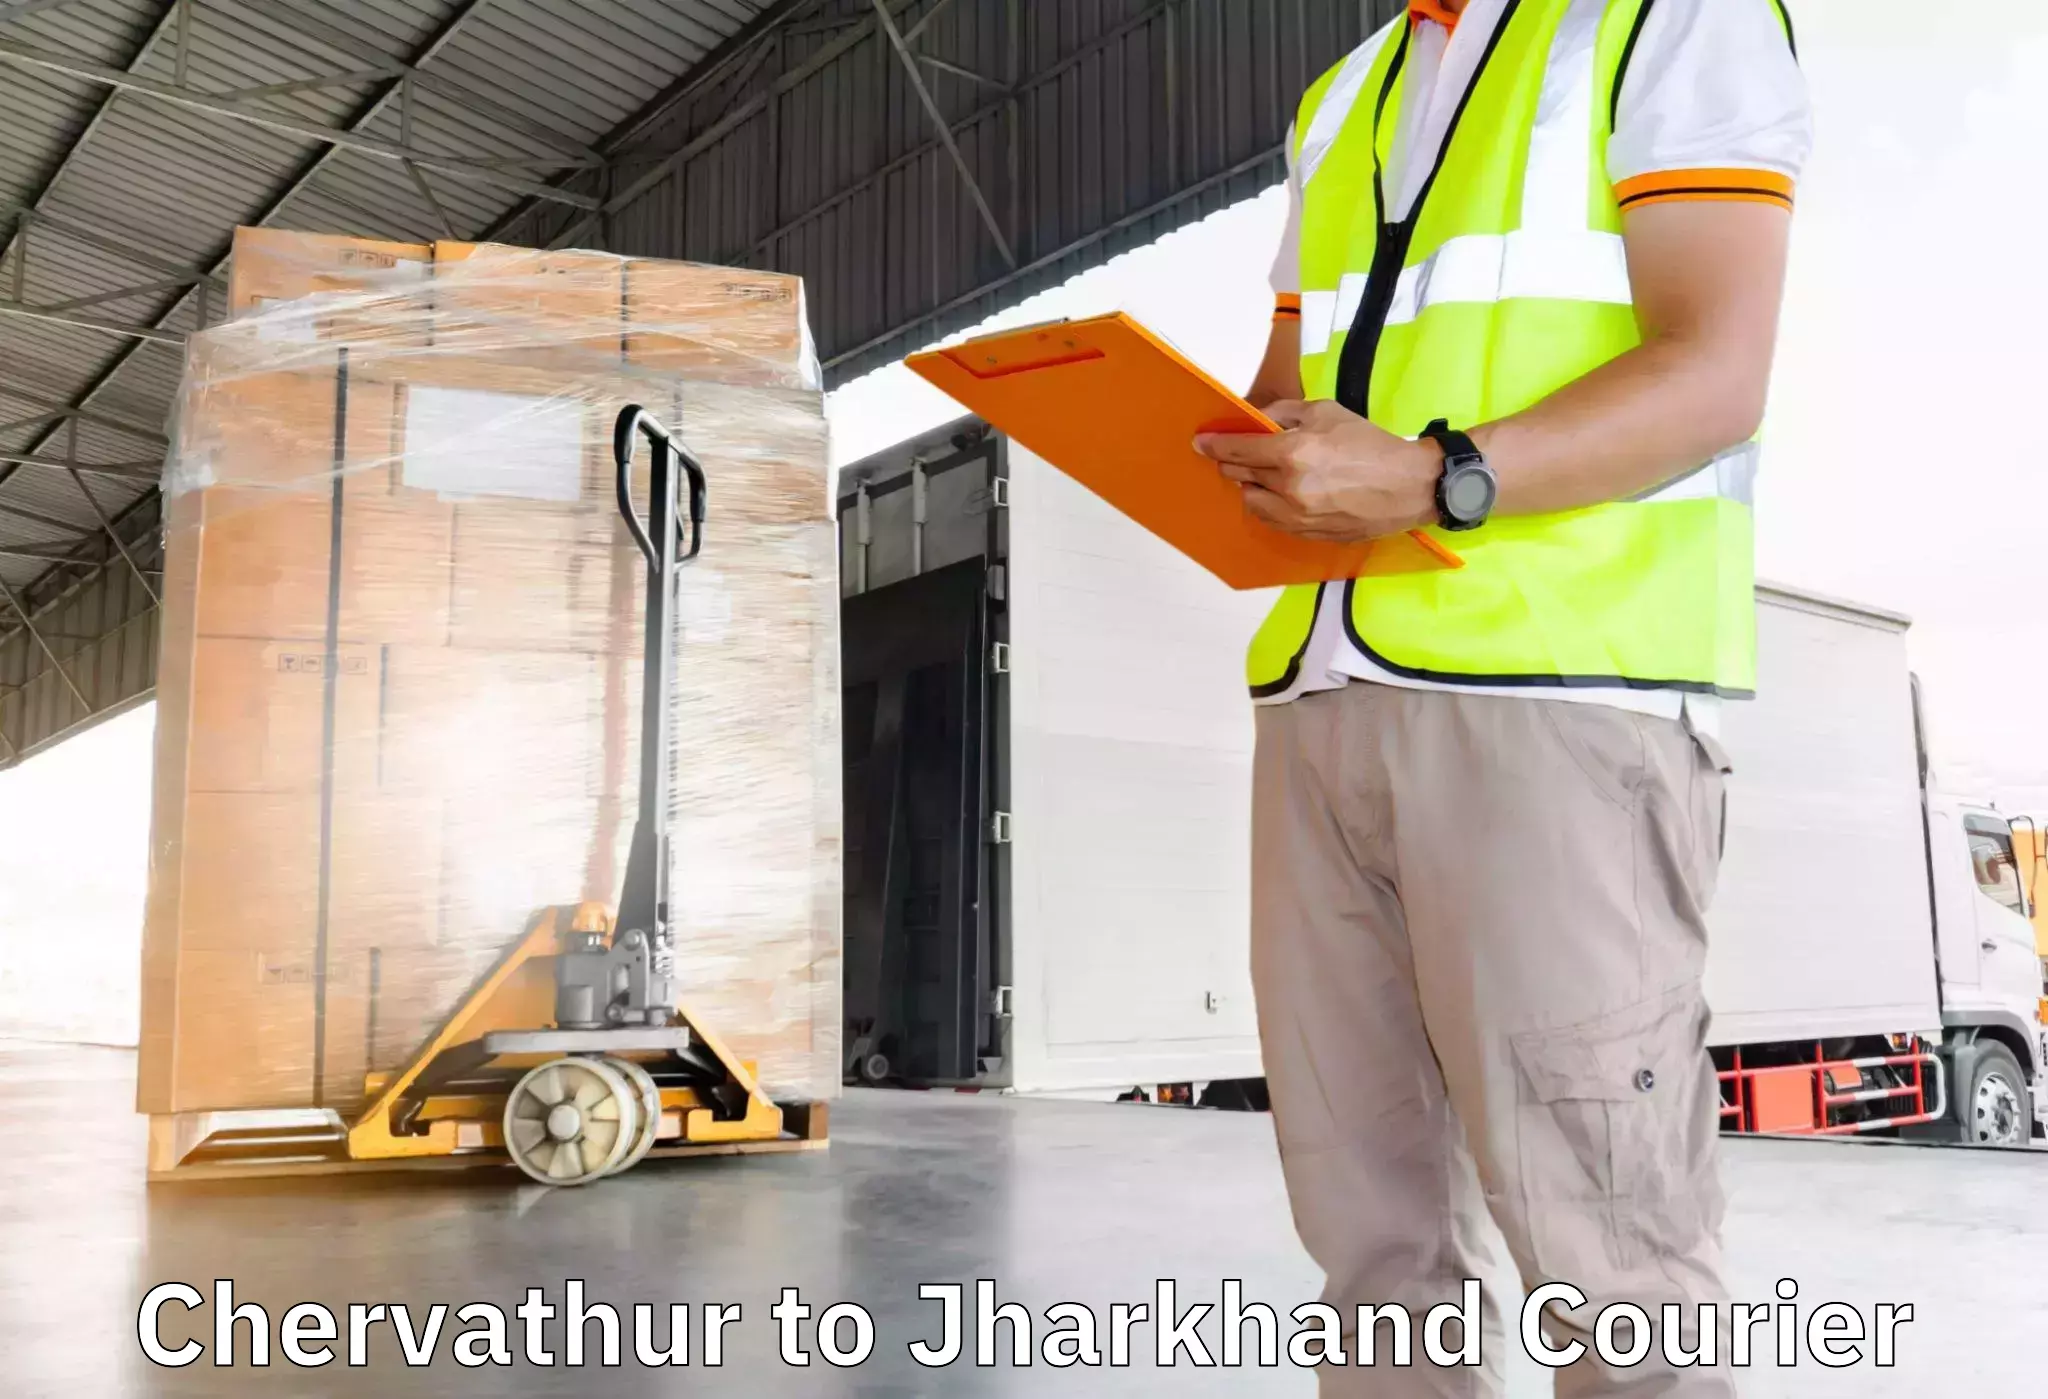 Furniture delivery service Chervathur to Pakur